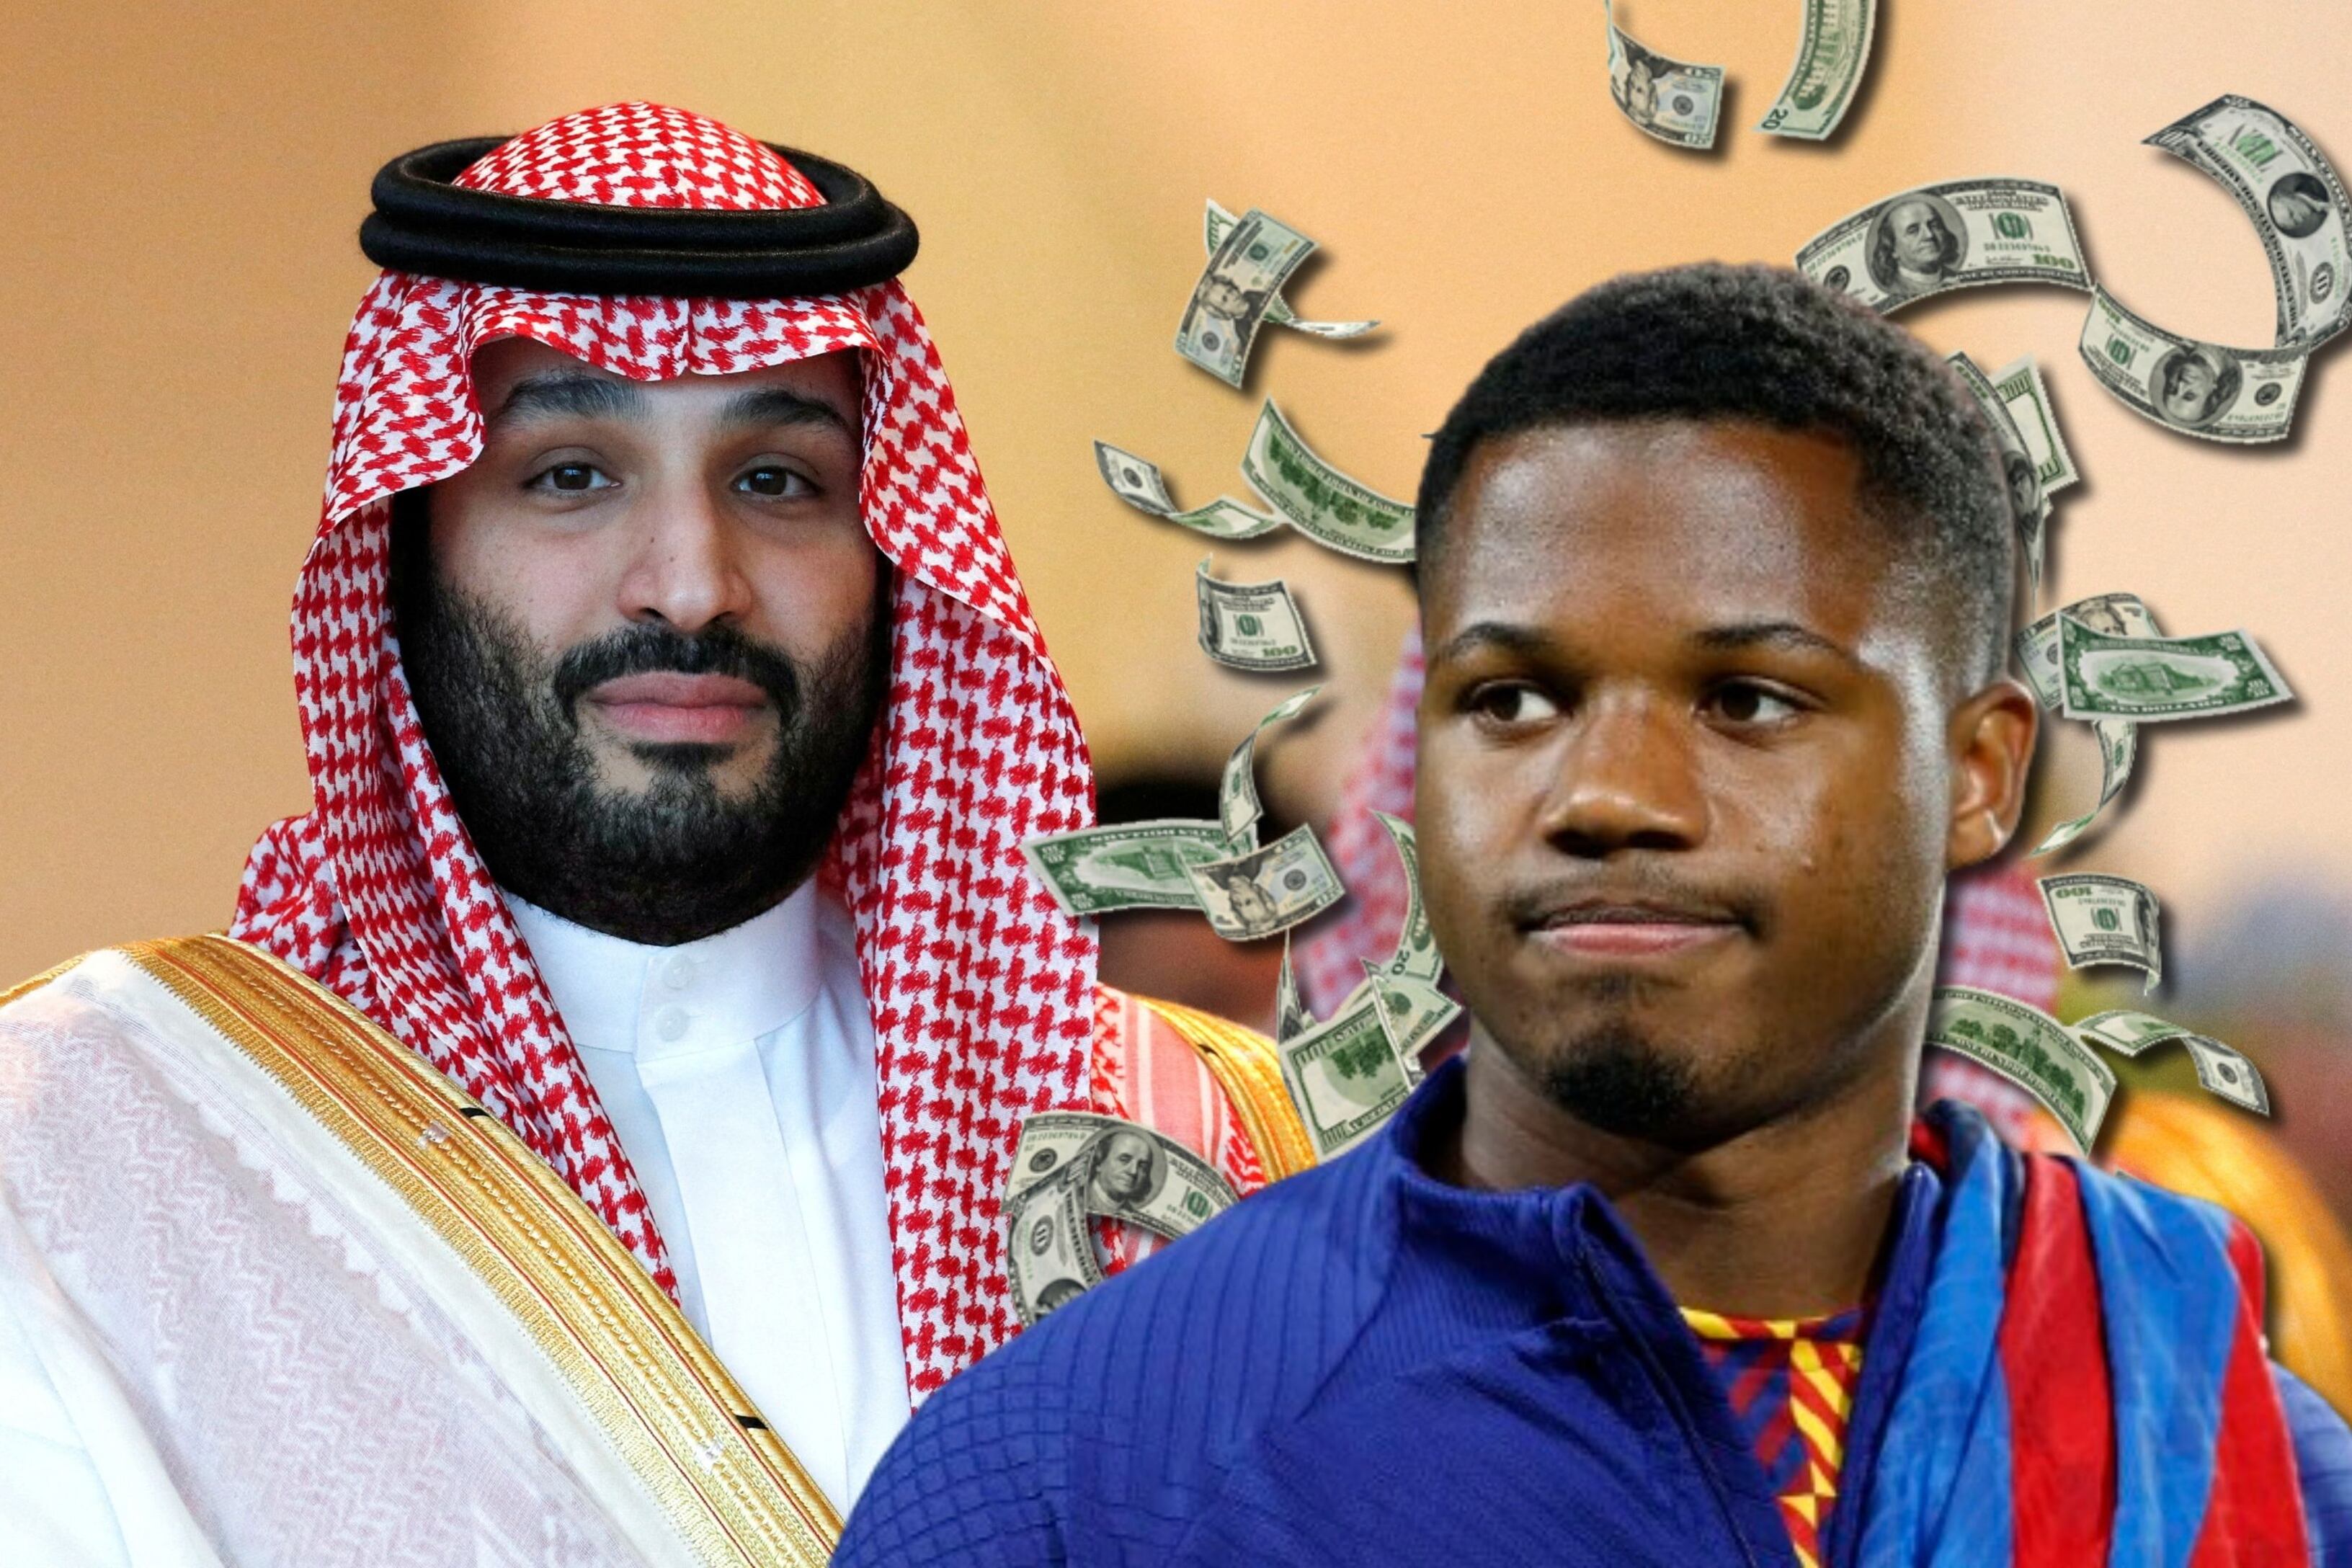 While Barcelona gifted him away, the millions Saudi Arabia would pay for Ansu Fati